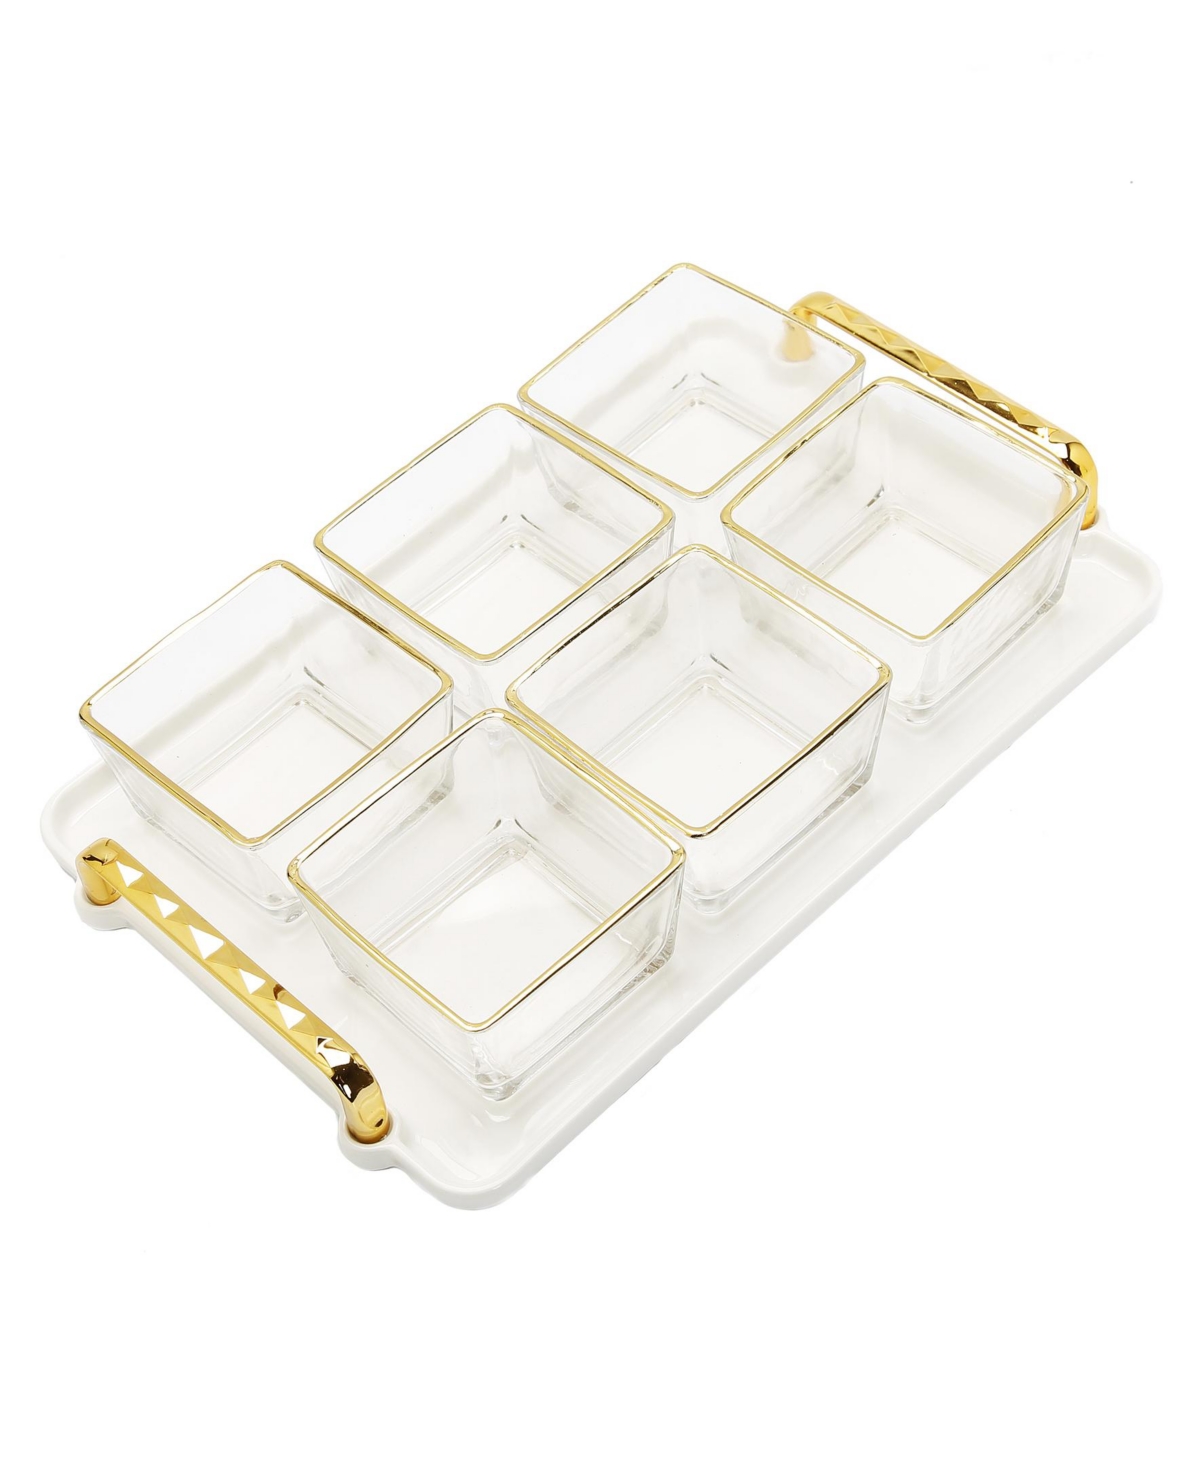 Classic Touch 6-piece Trimmed Glass Bowl On Serving Dish Tray Set In Gold